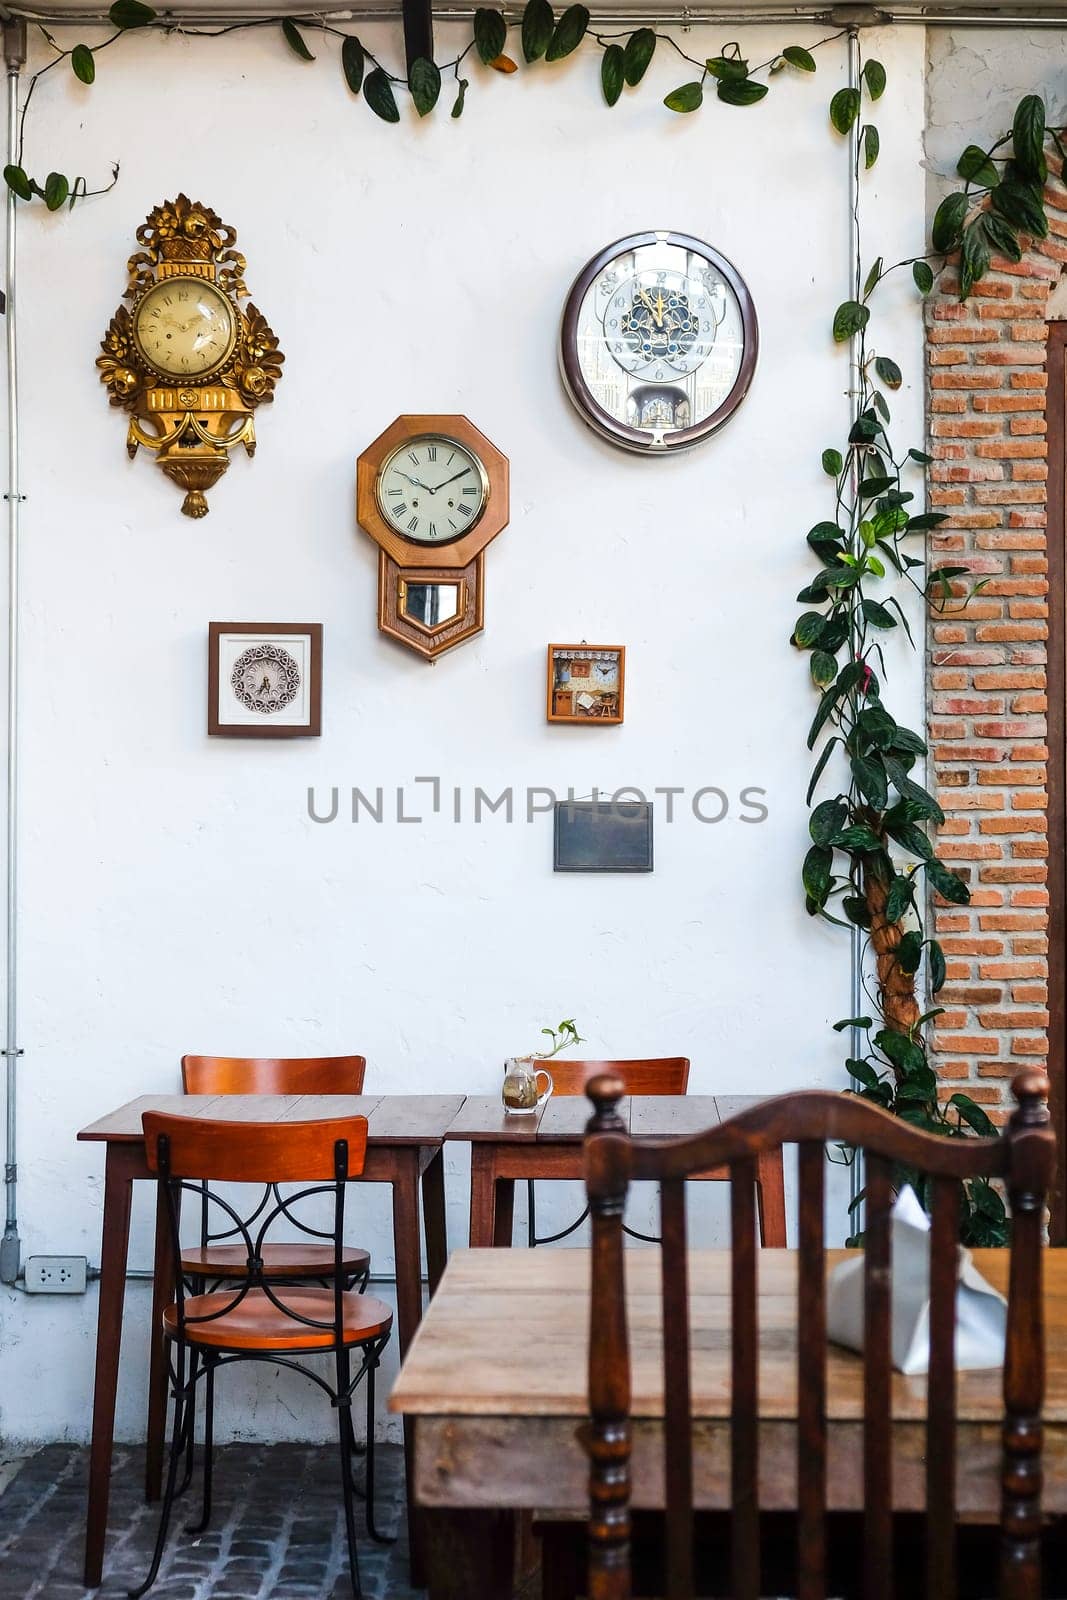 interior of a Vintage Dining Room with decorative objects and furniture. The concept of rest and relaxation